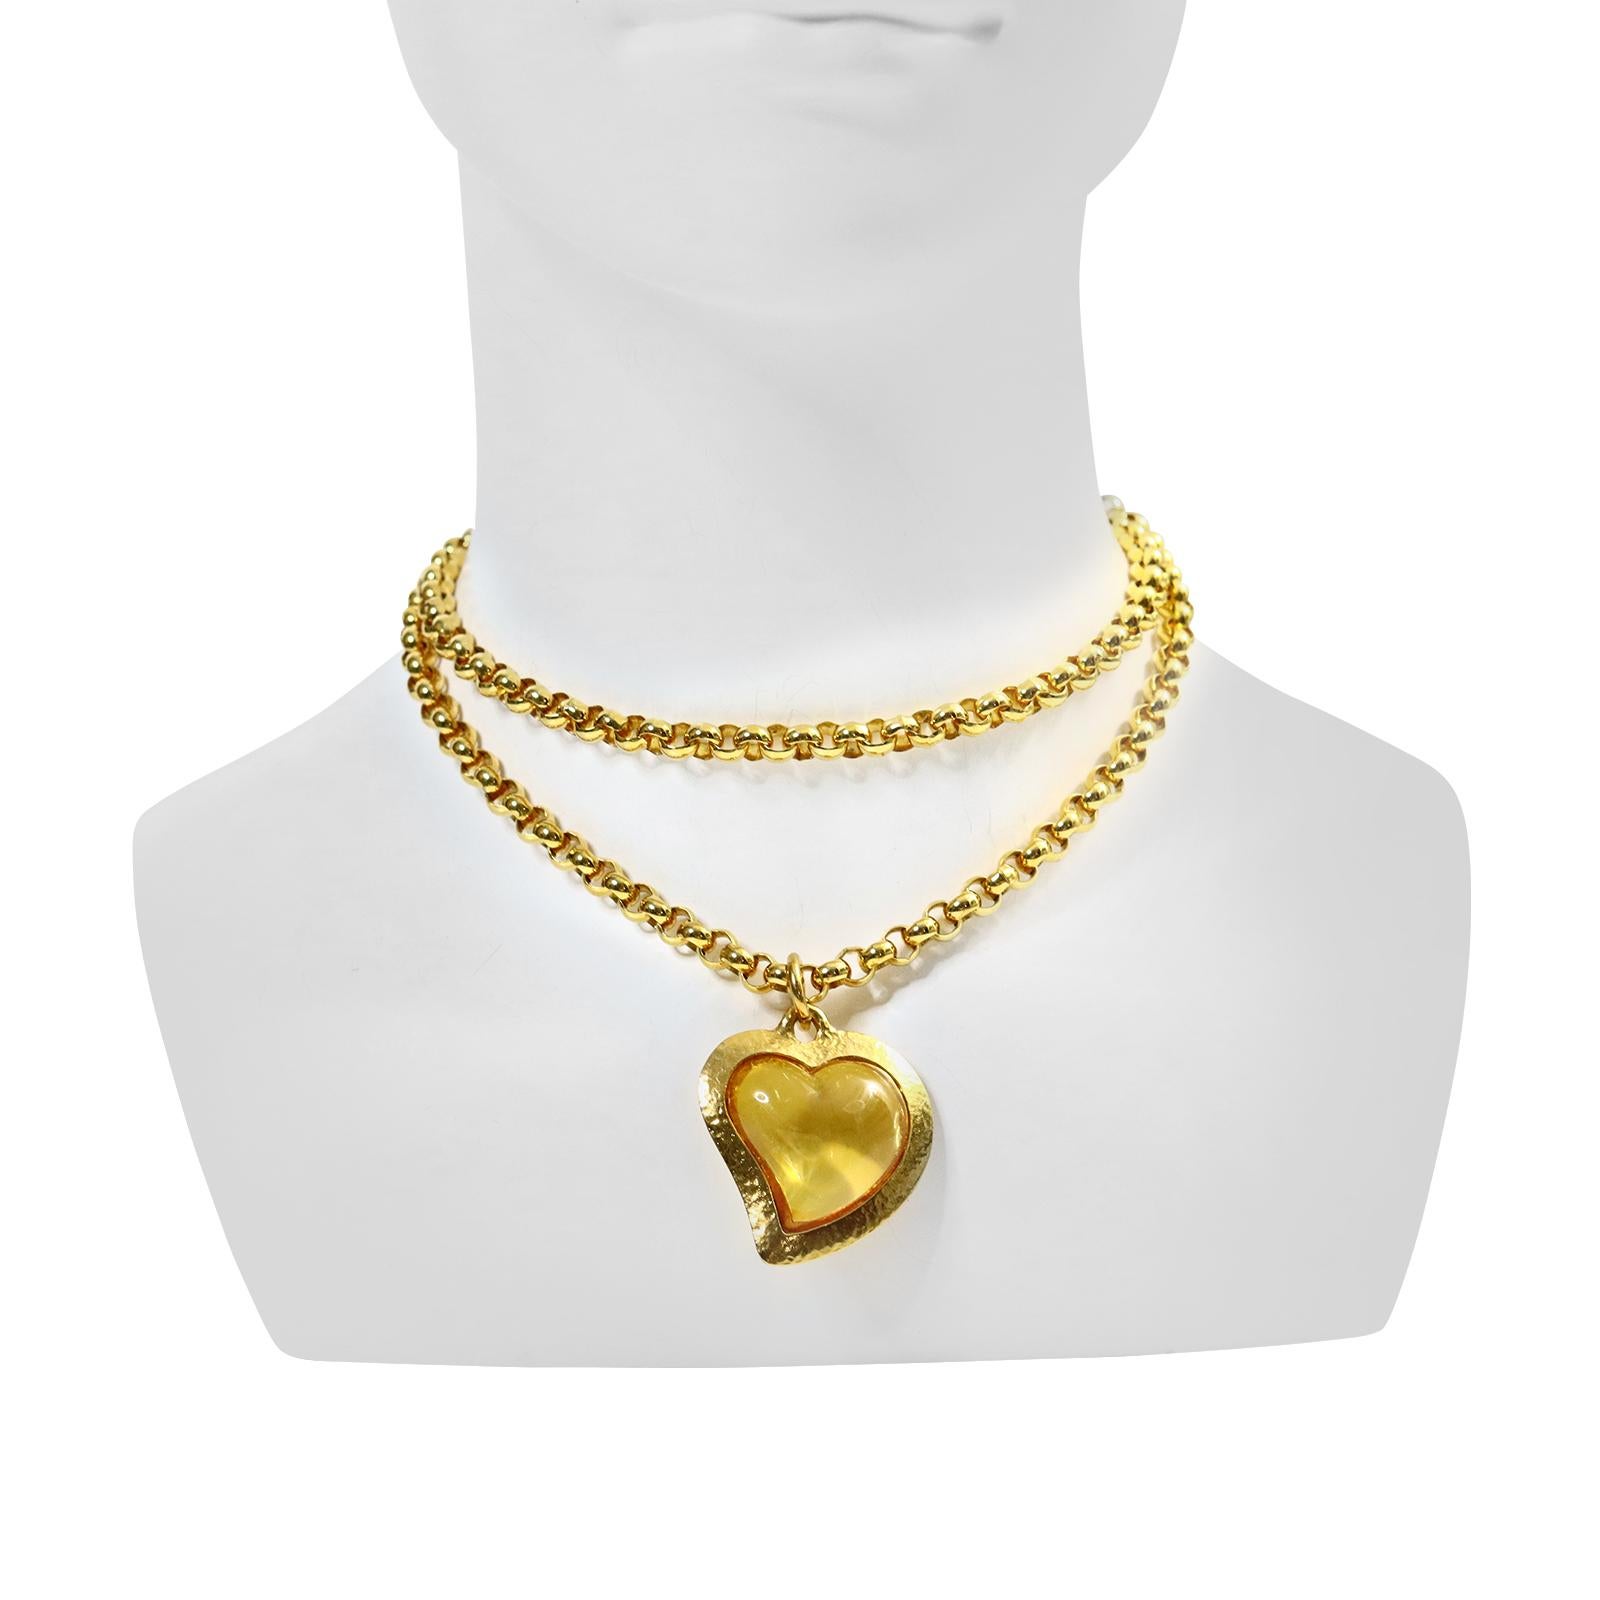 Vintage Yves Saint Laurent YSL Amber Resin Heart on Rollo Long Chain Circa 1980s.  The Heart is Surrounded by a Gold Tone piece that is Signed YSL. The Necklace is not.  The piece can be Long, Doubled worn as a lariat or worn tight against the neck